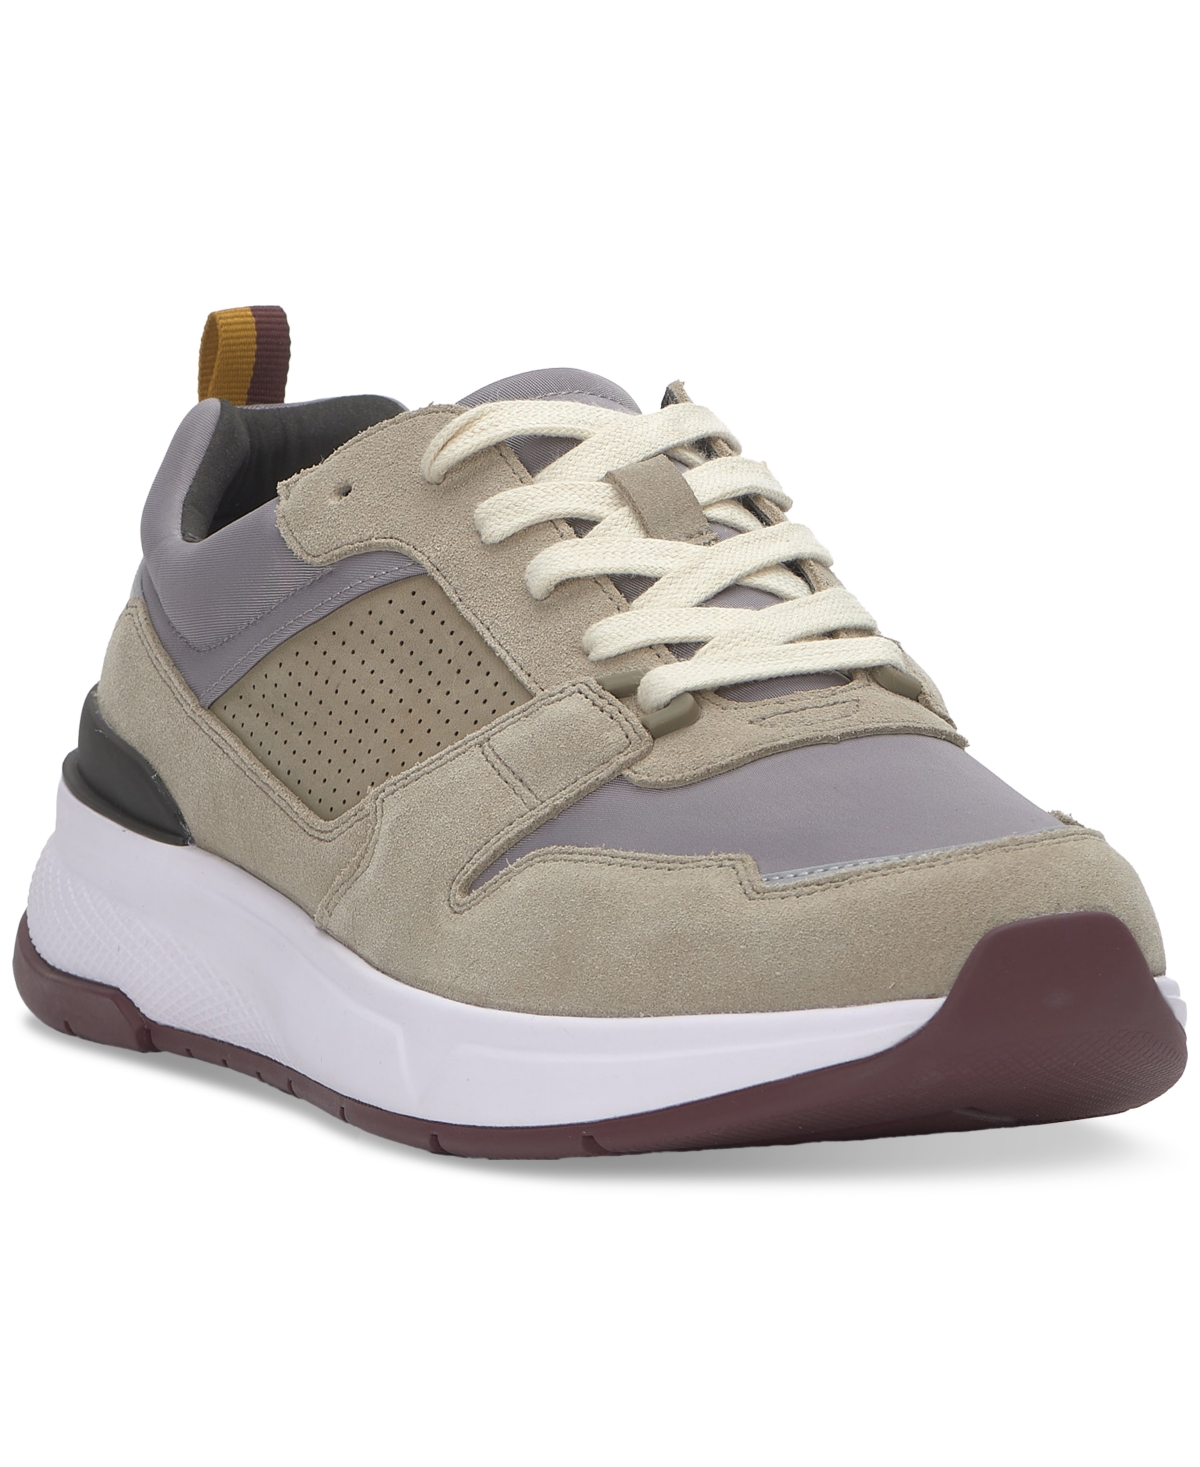 Men's Gavyn Lace-Up Sneakers - Sand Coconut Grey